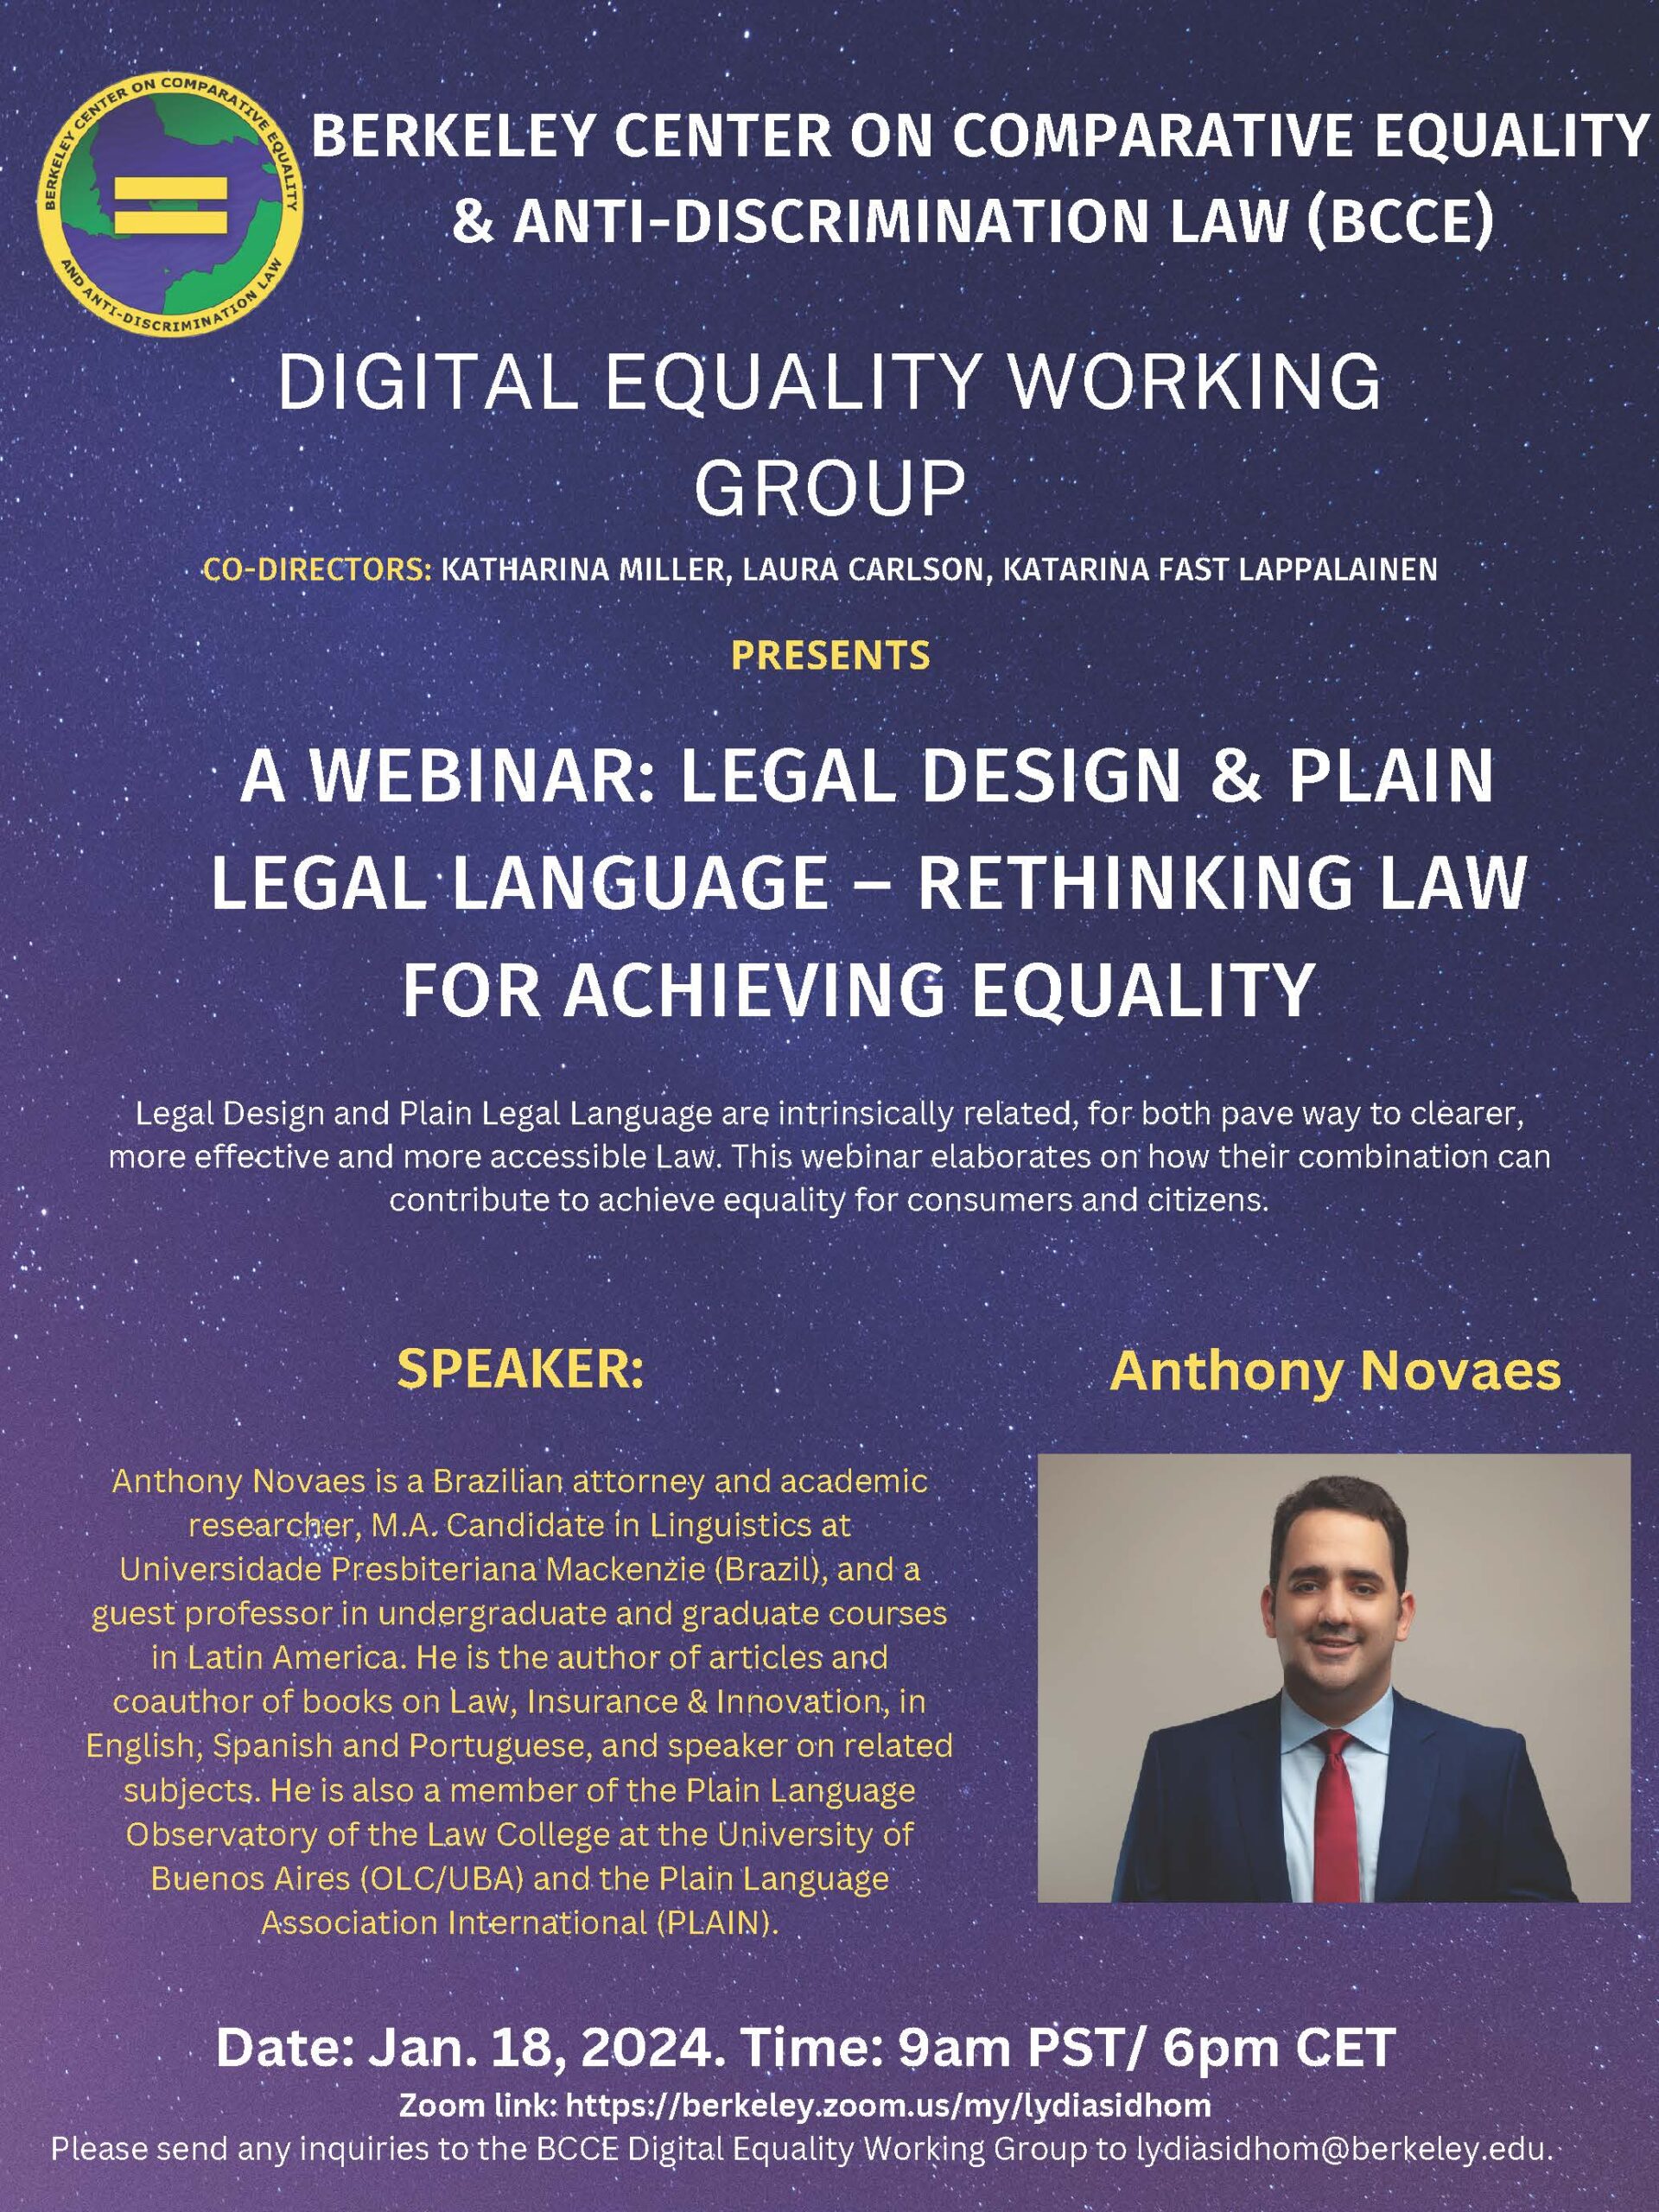 Flyer for Webinar: Legal Design & Plain Legal Language - Rethinking Law for Achieving Equality